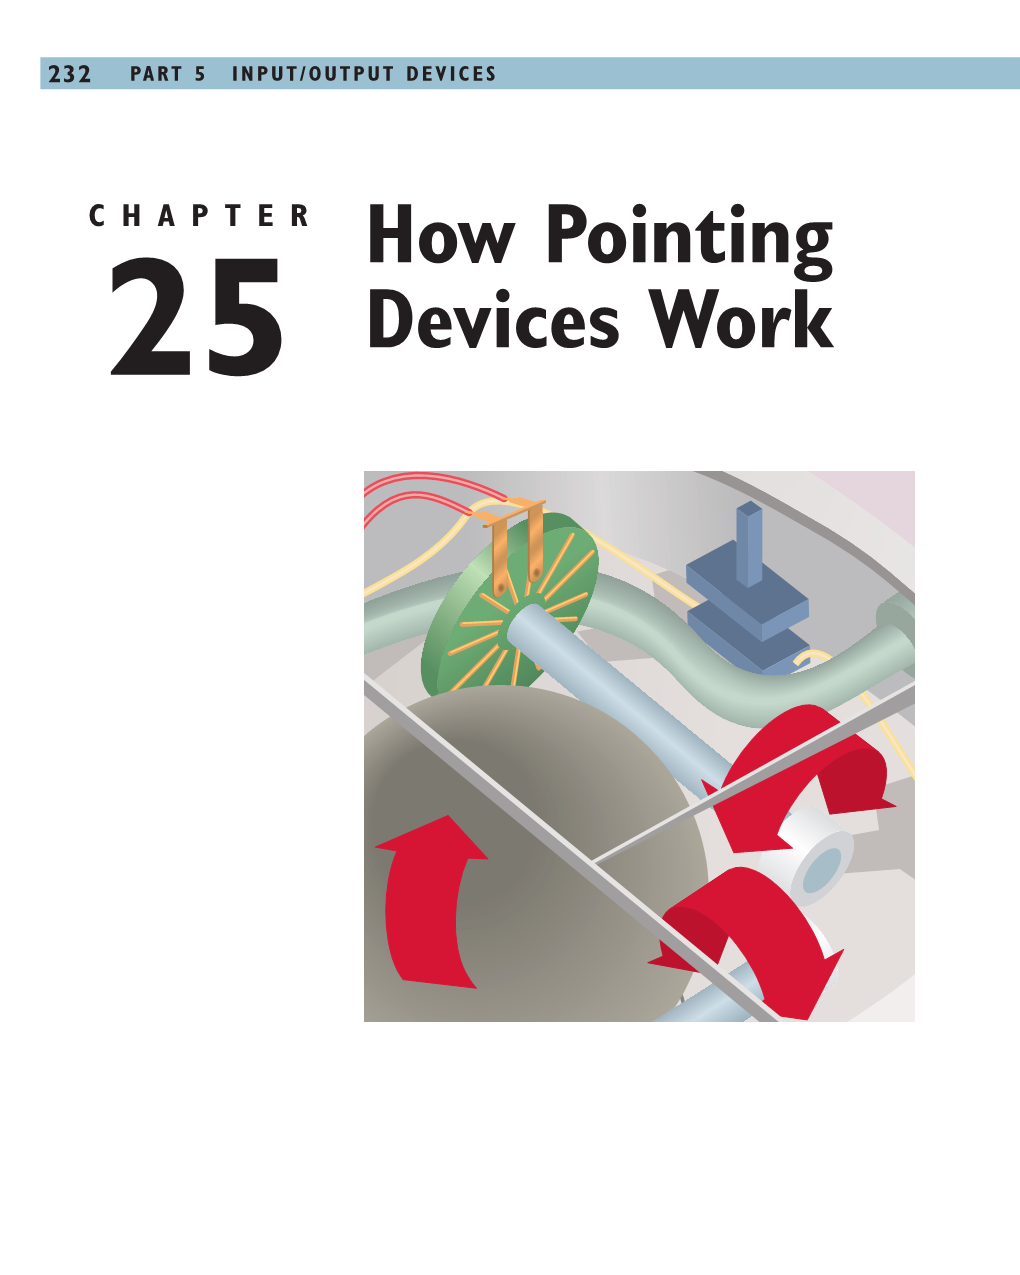 How Pointing Devices Work 235